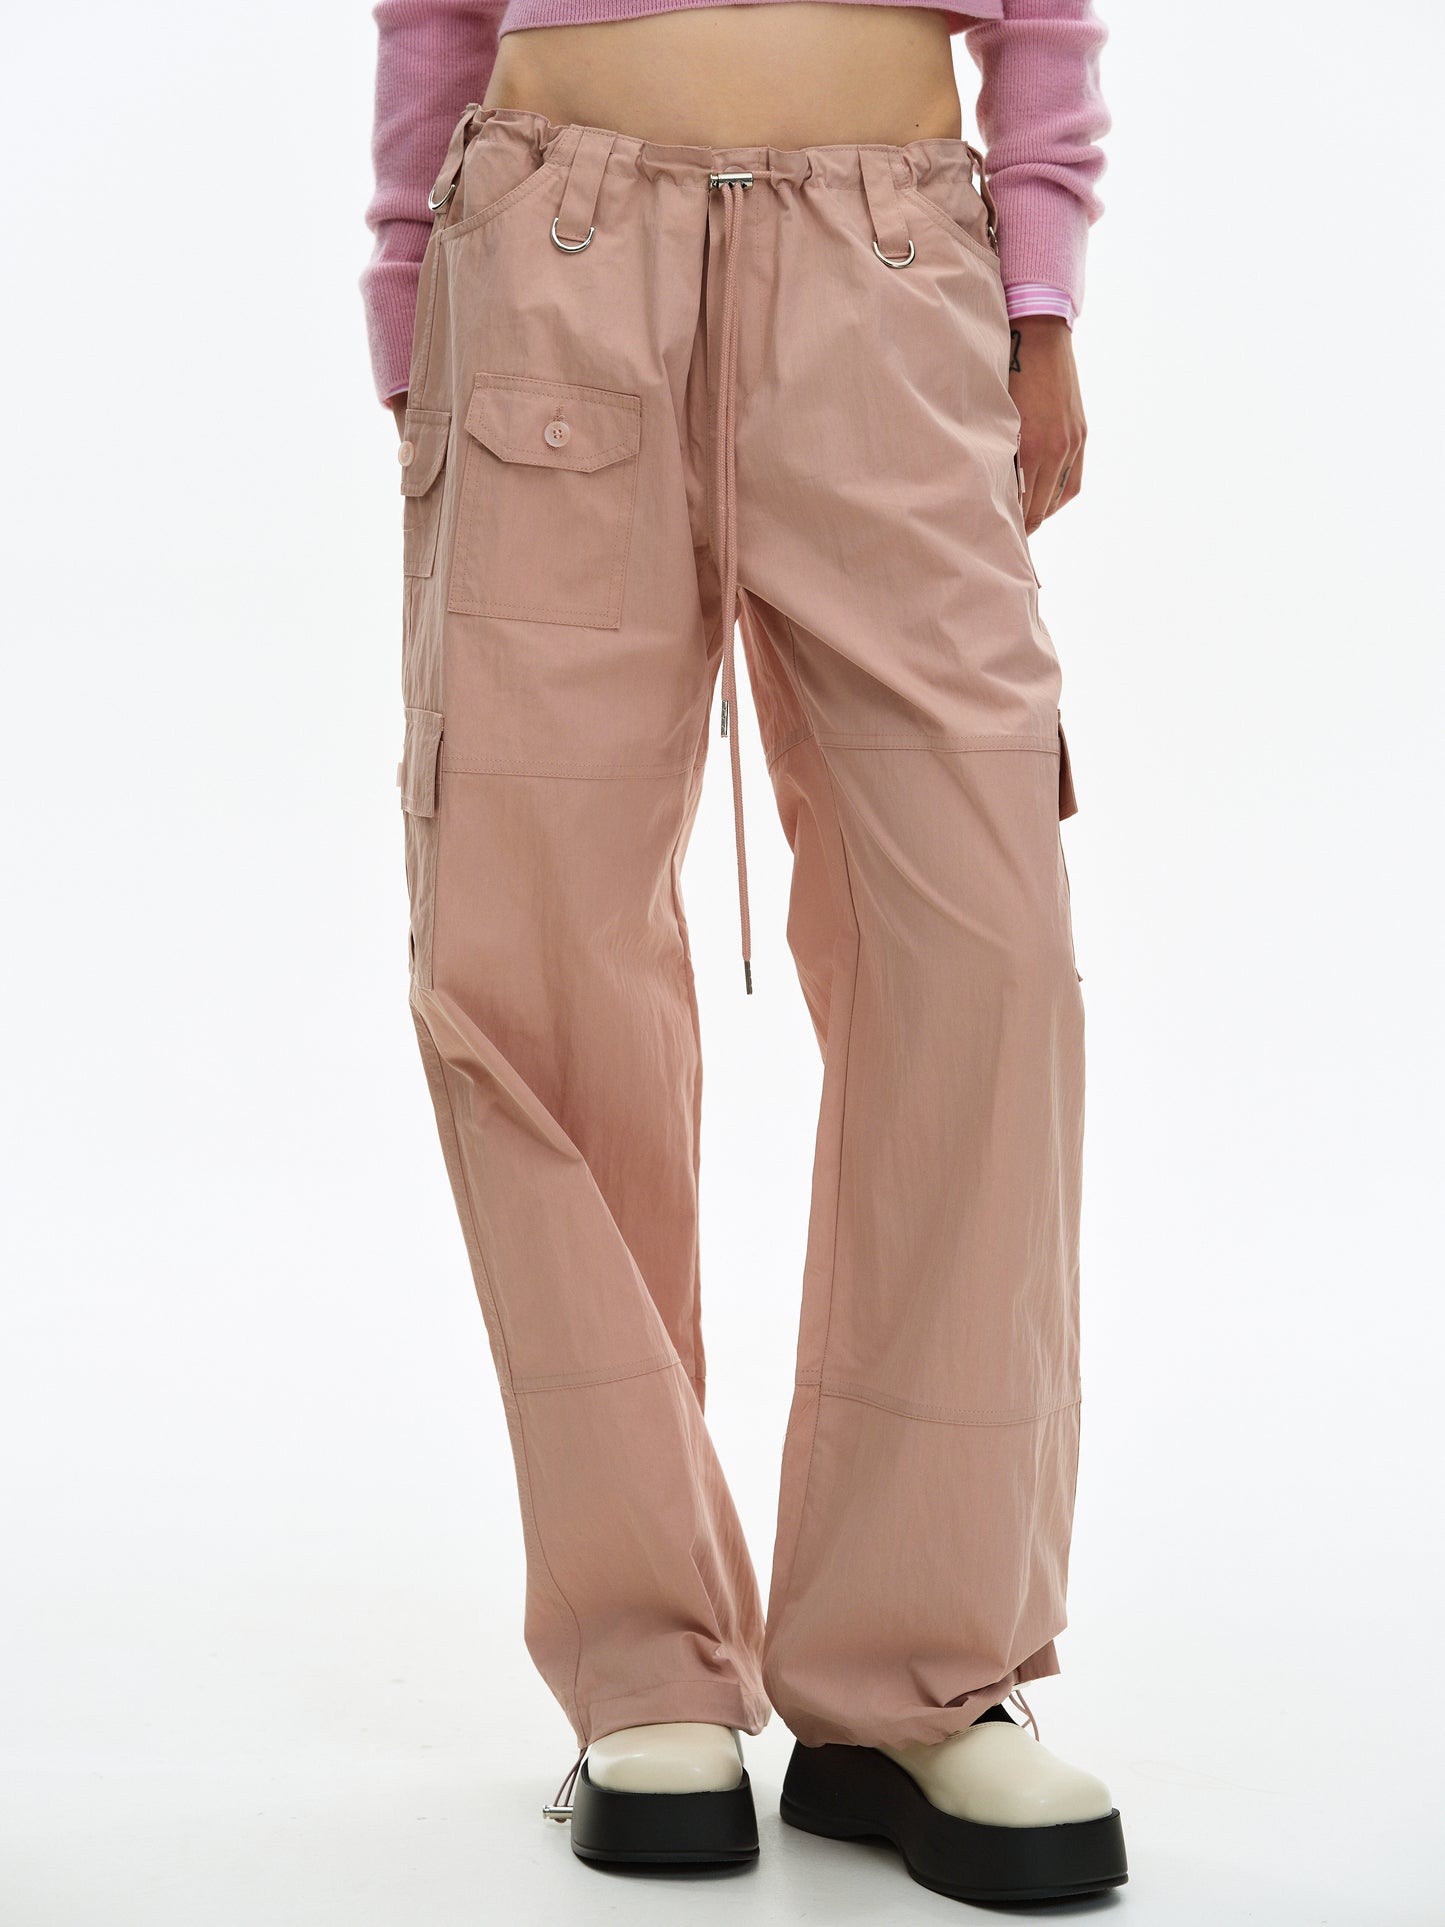 Parachute – SourceUnknown Cargo Trousers, Dusty Pink